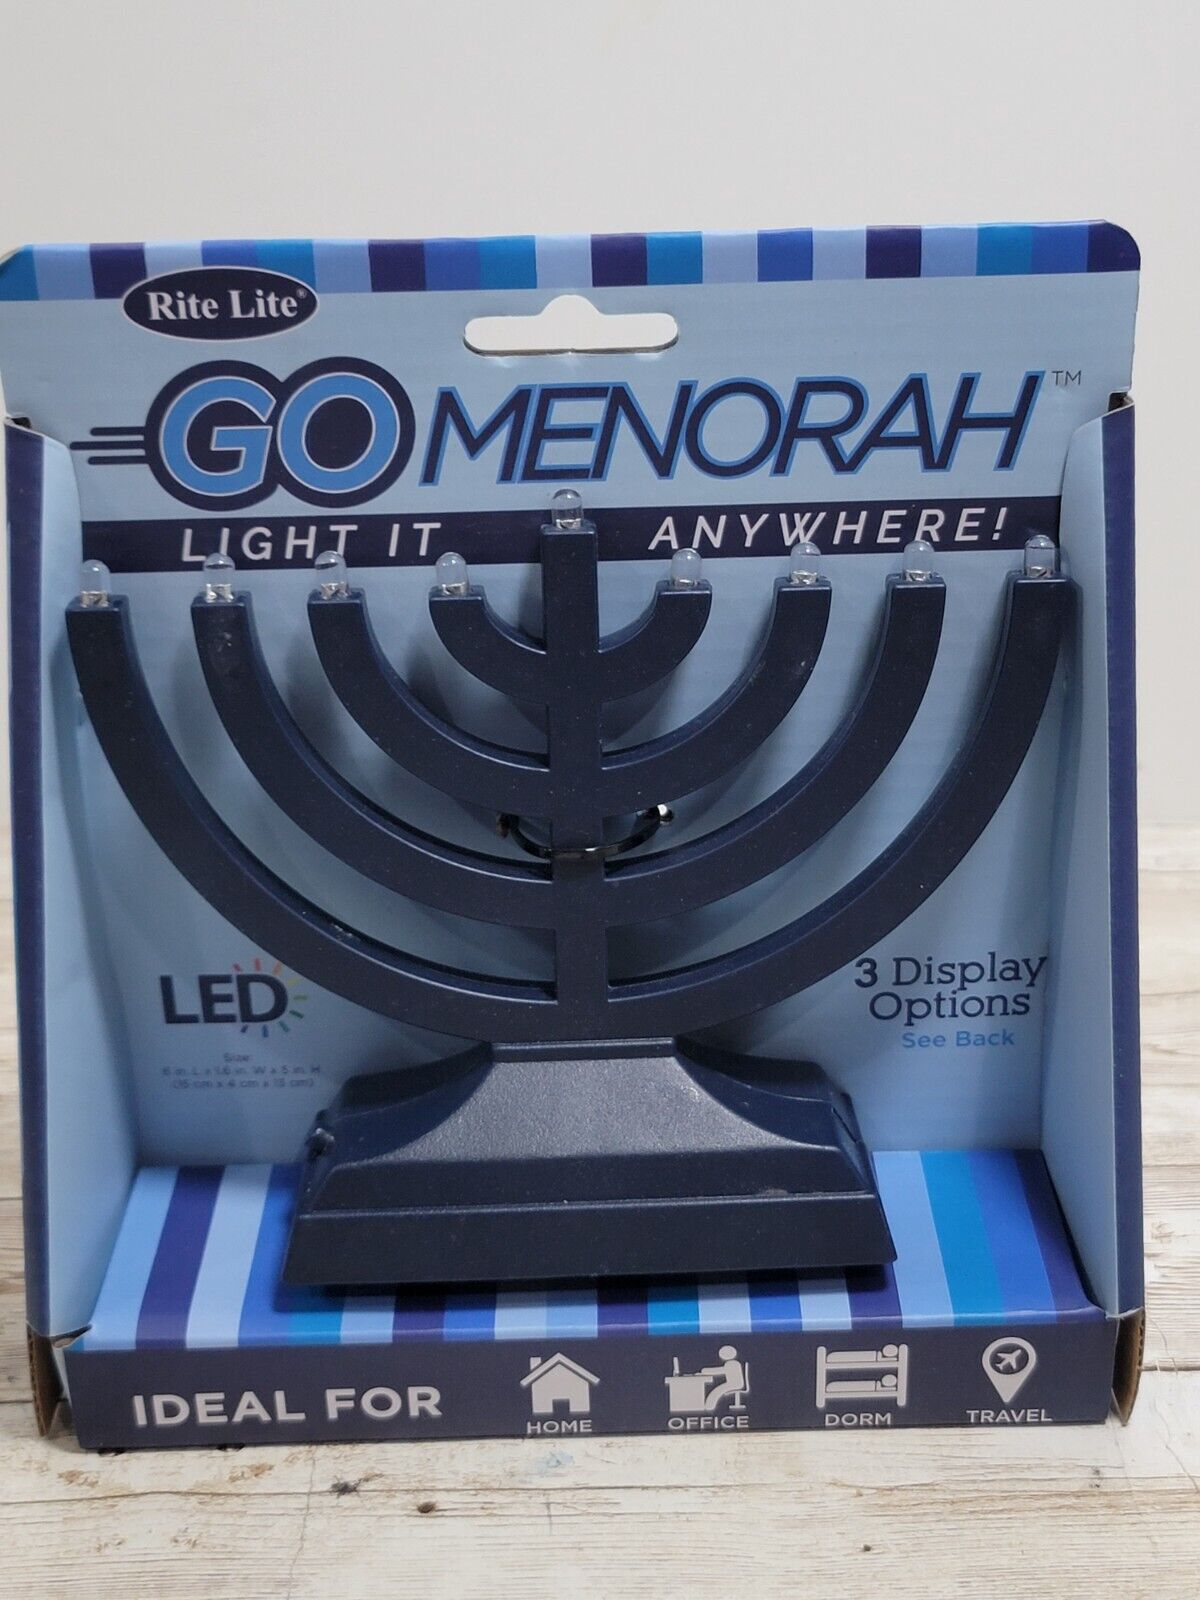 Rite Lite Led Menorah Battery Operated or USB Cable Blue Tint NIB 11.5 inches